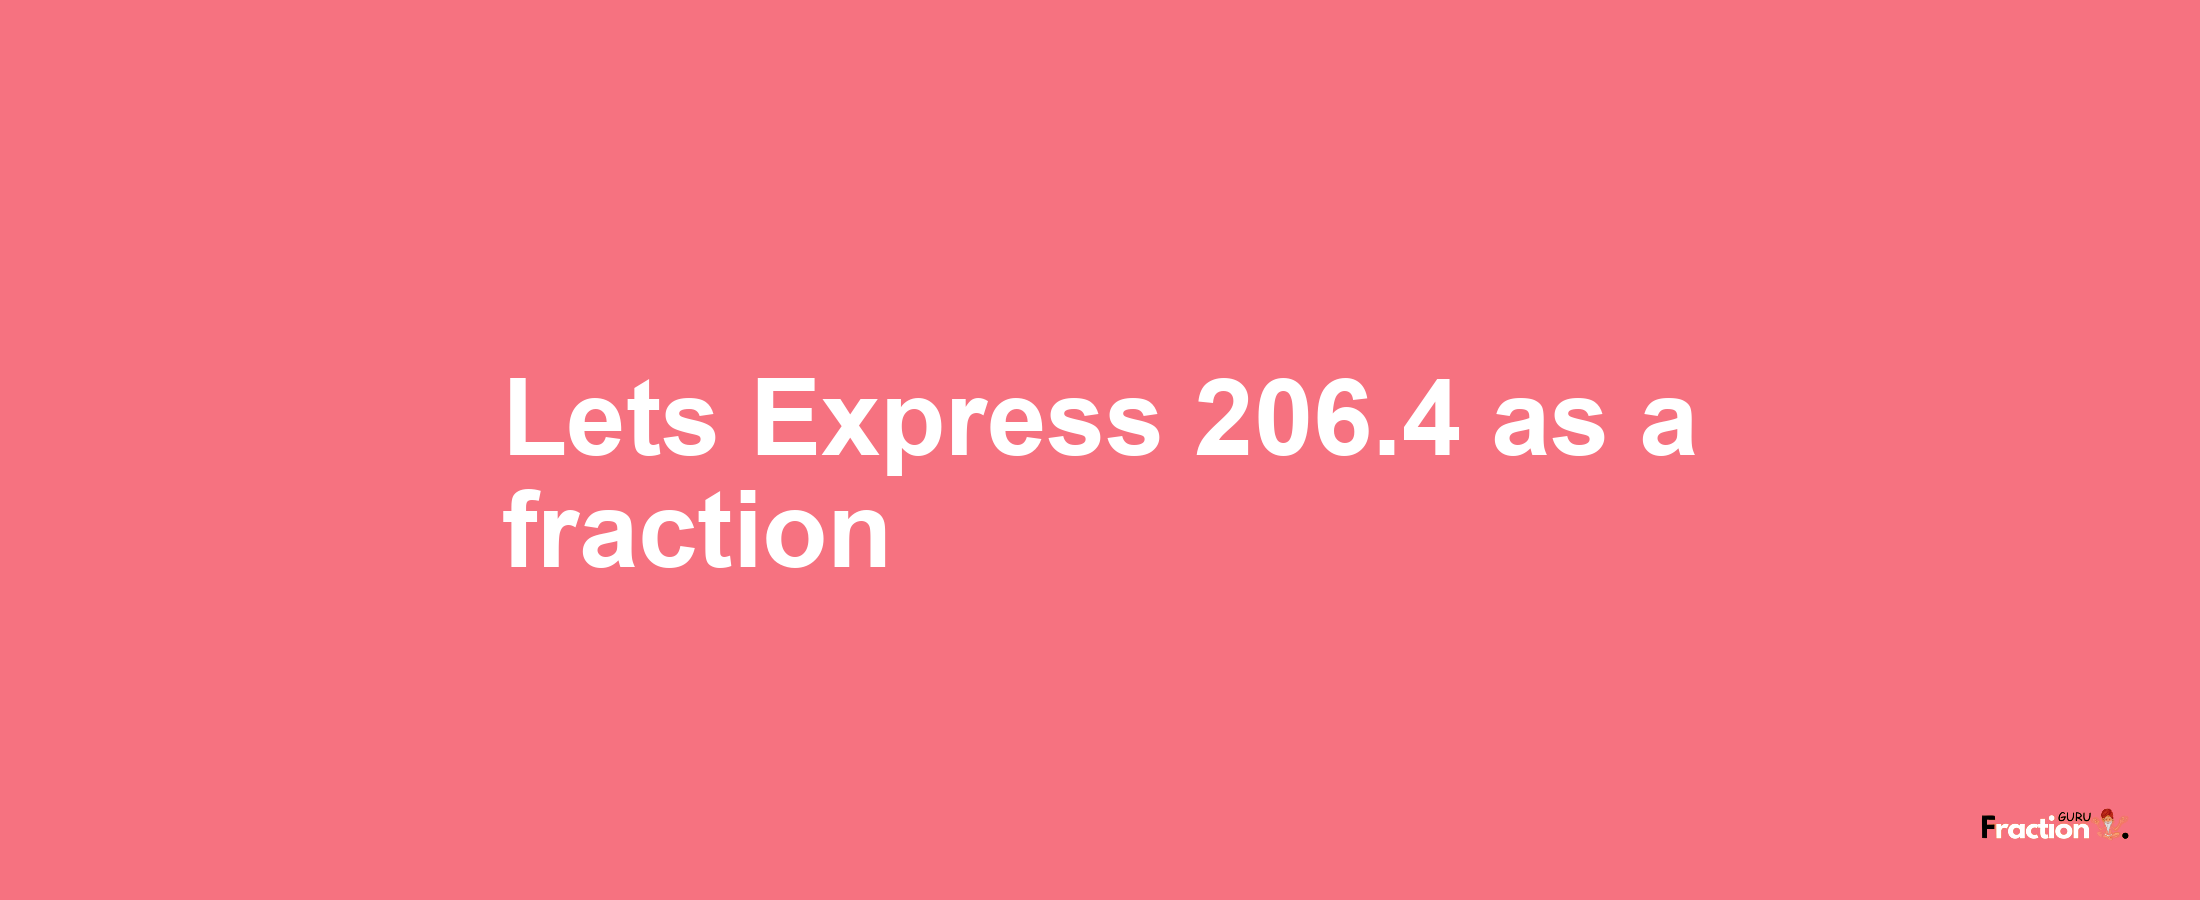 Lets Express 206.4 as afraction